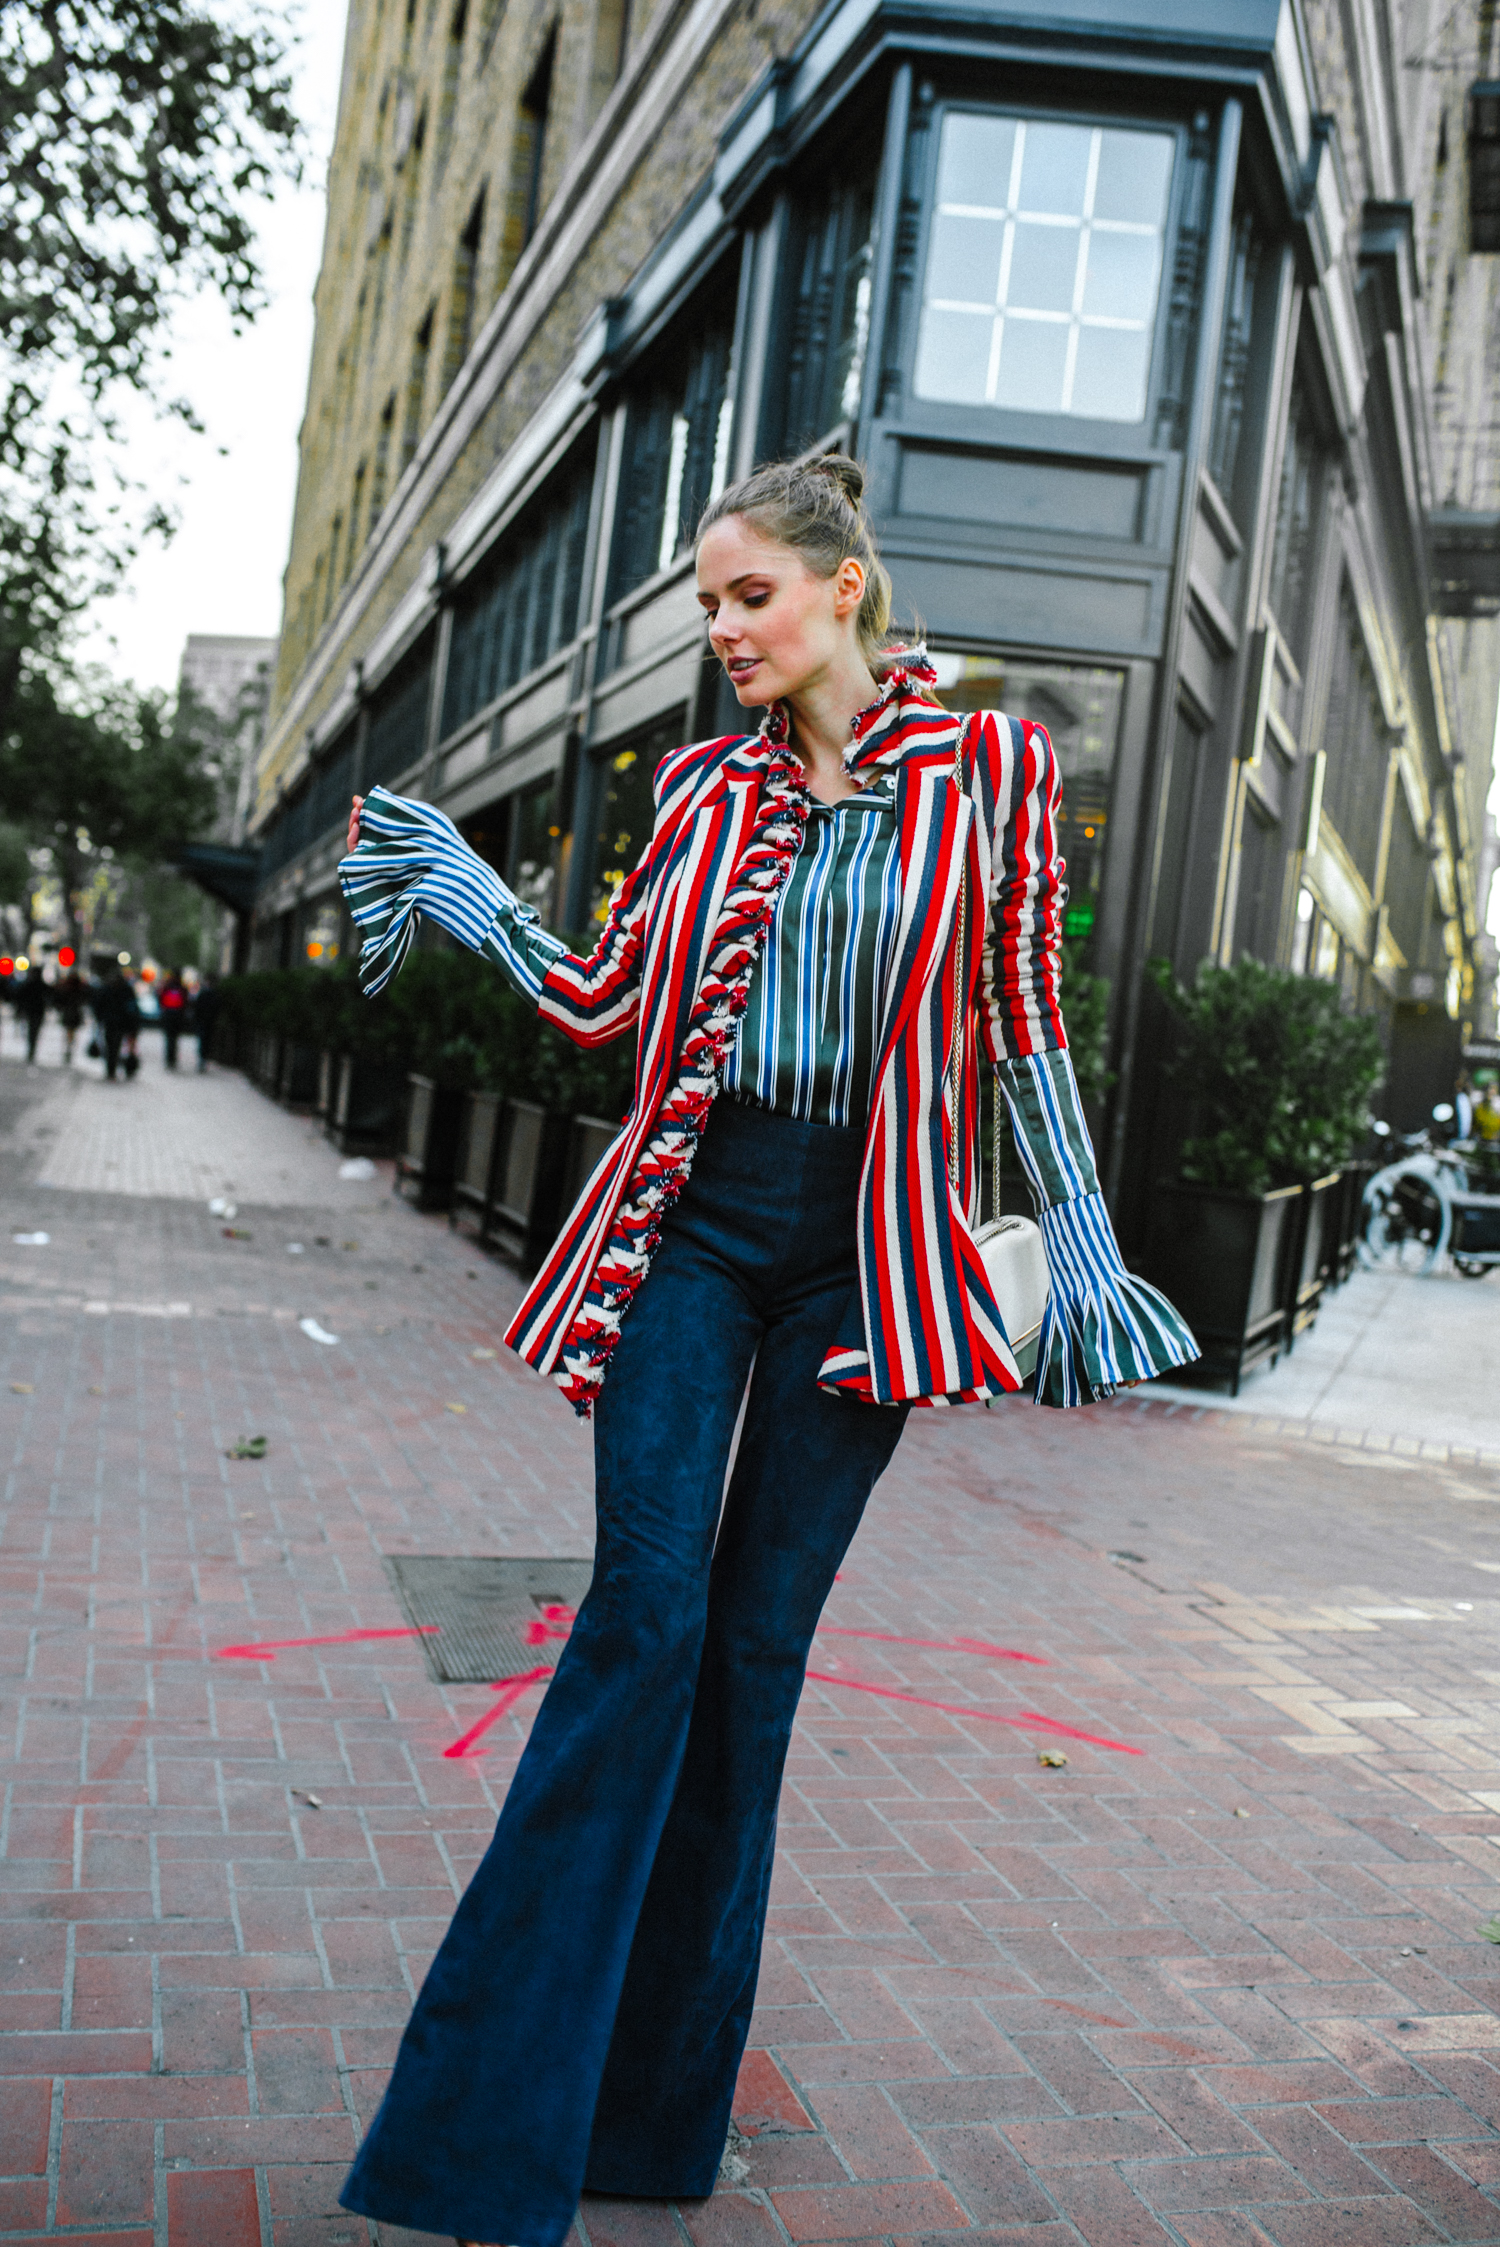 Alyssa Campanella of The A List blog travels to San Francisco with Alaska Airlines and Shopstyle wearing Maggie Marilyn I Lead From The Heart blazer, Brandon Maxwell suede pants, and Strathberry East/West bag